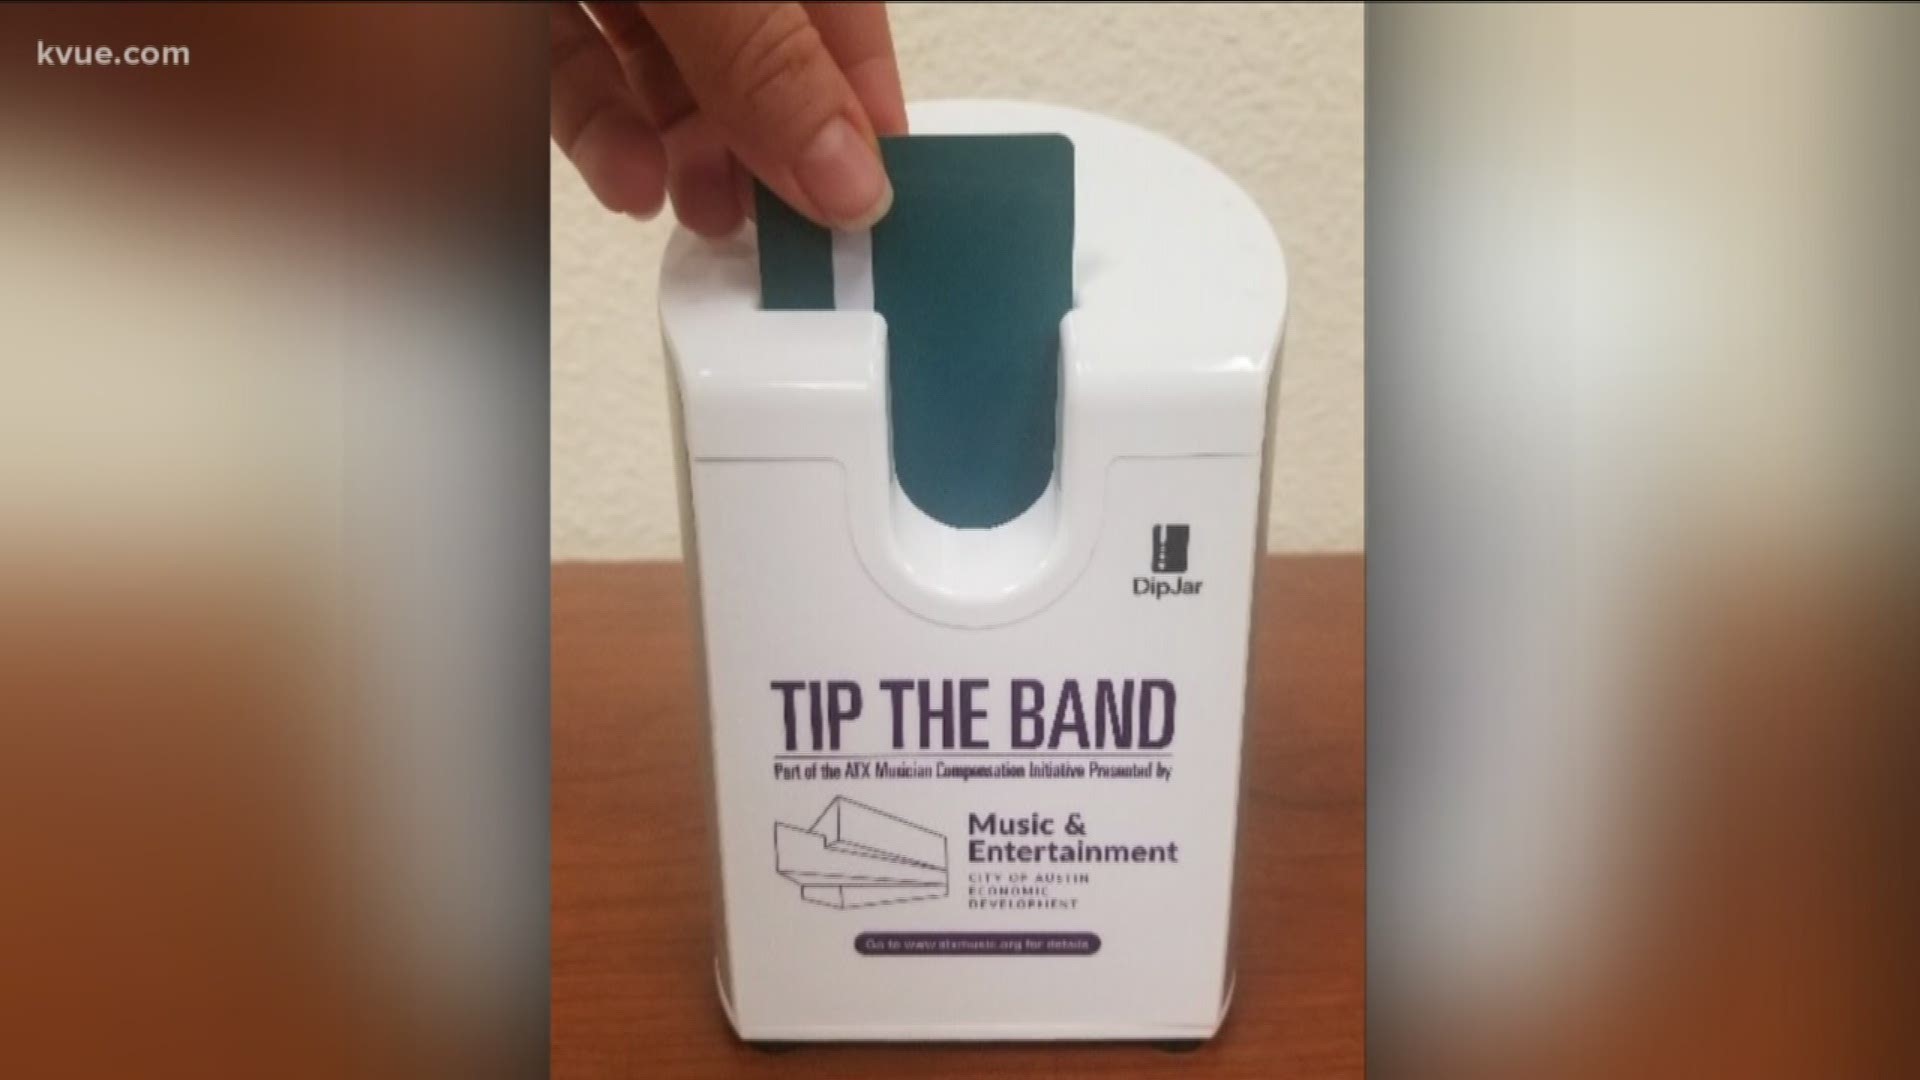 The City of Austin has picked the artists that will be part of a pilot program aimed at making it easier to tip musicians.